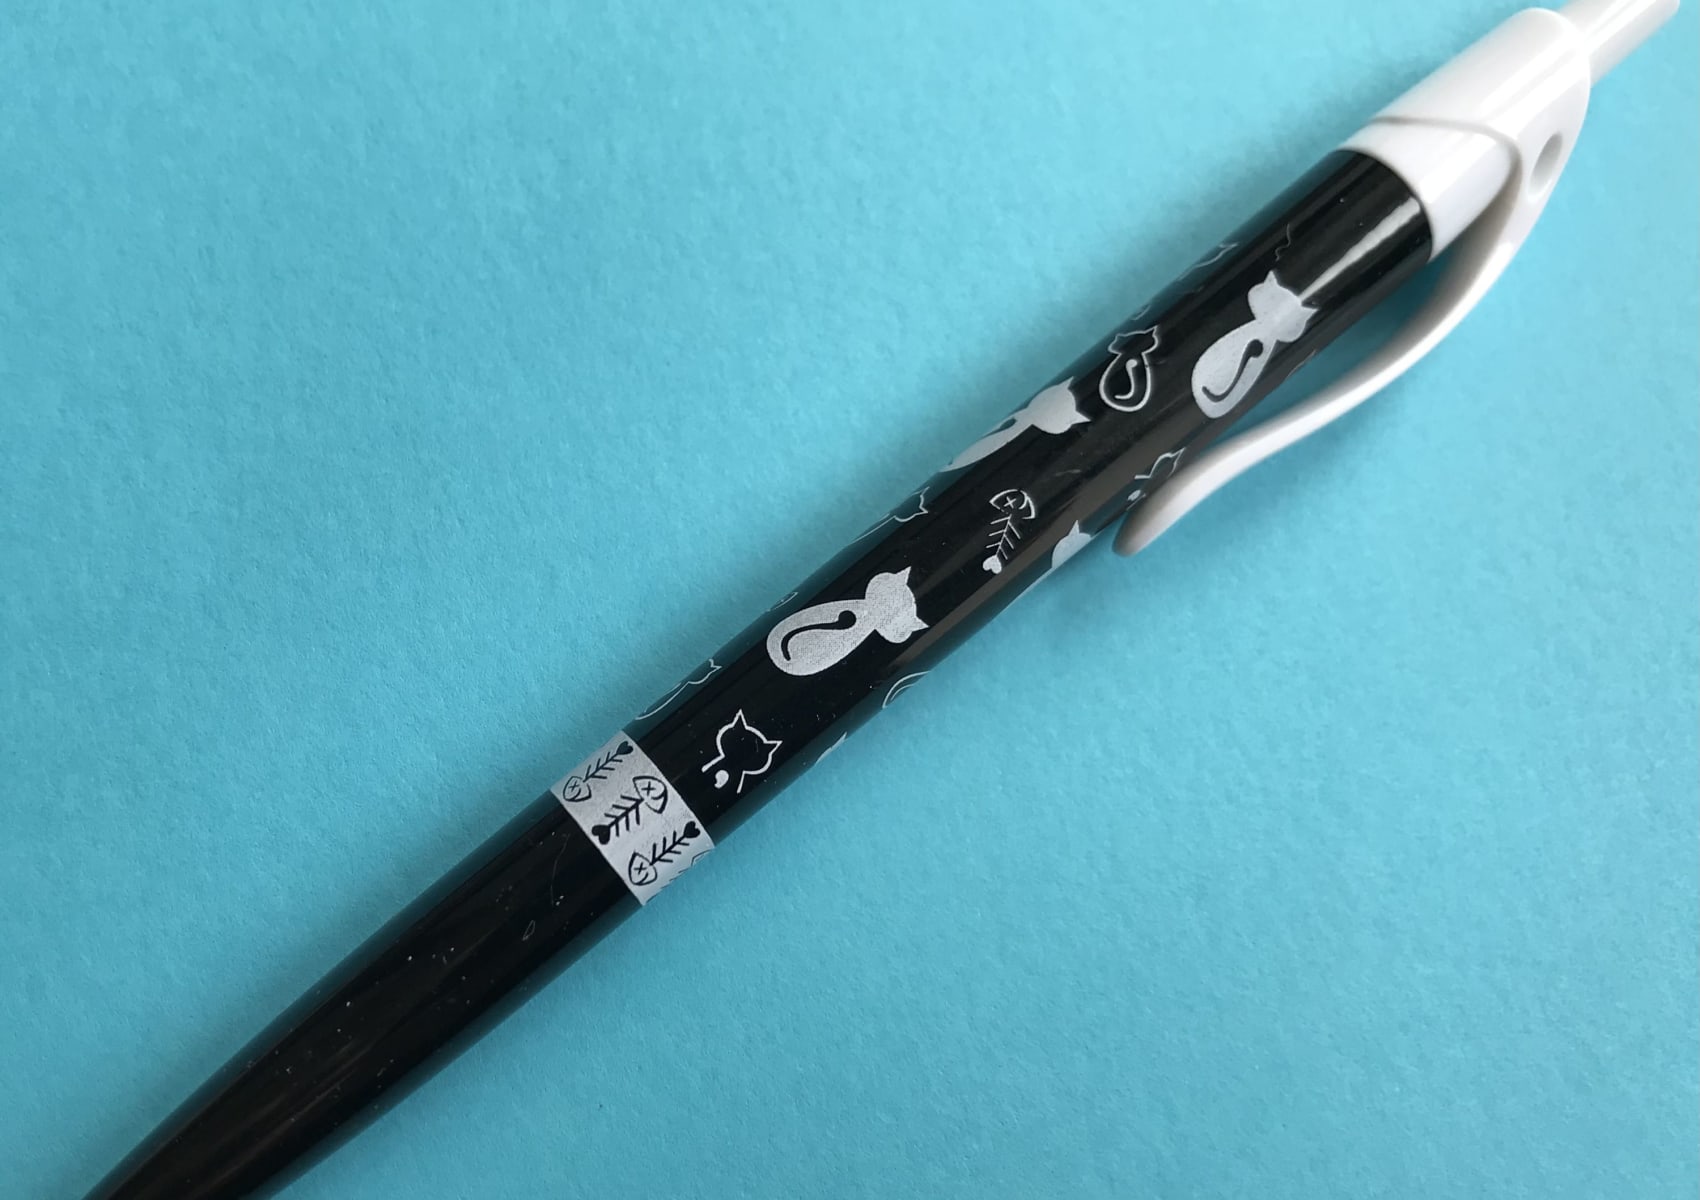 Black click pen with black and white cat designs